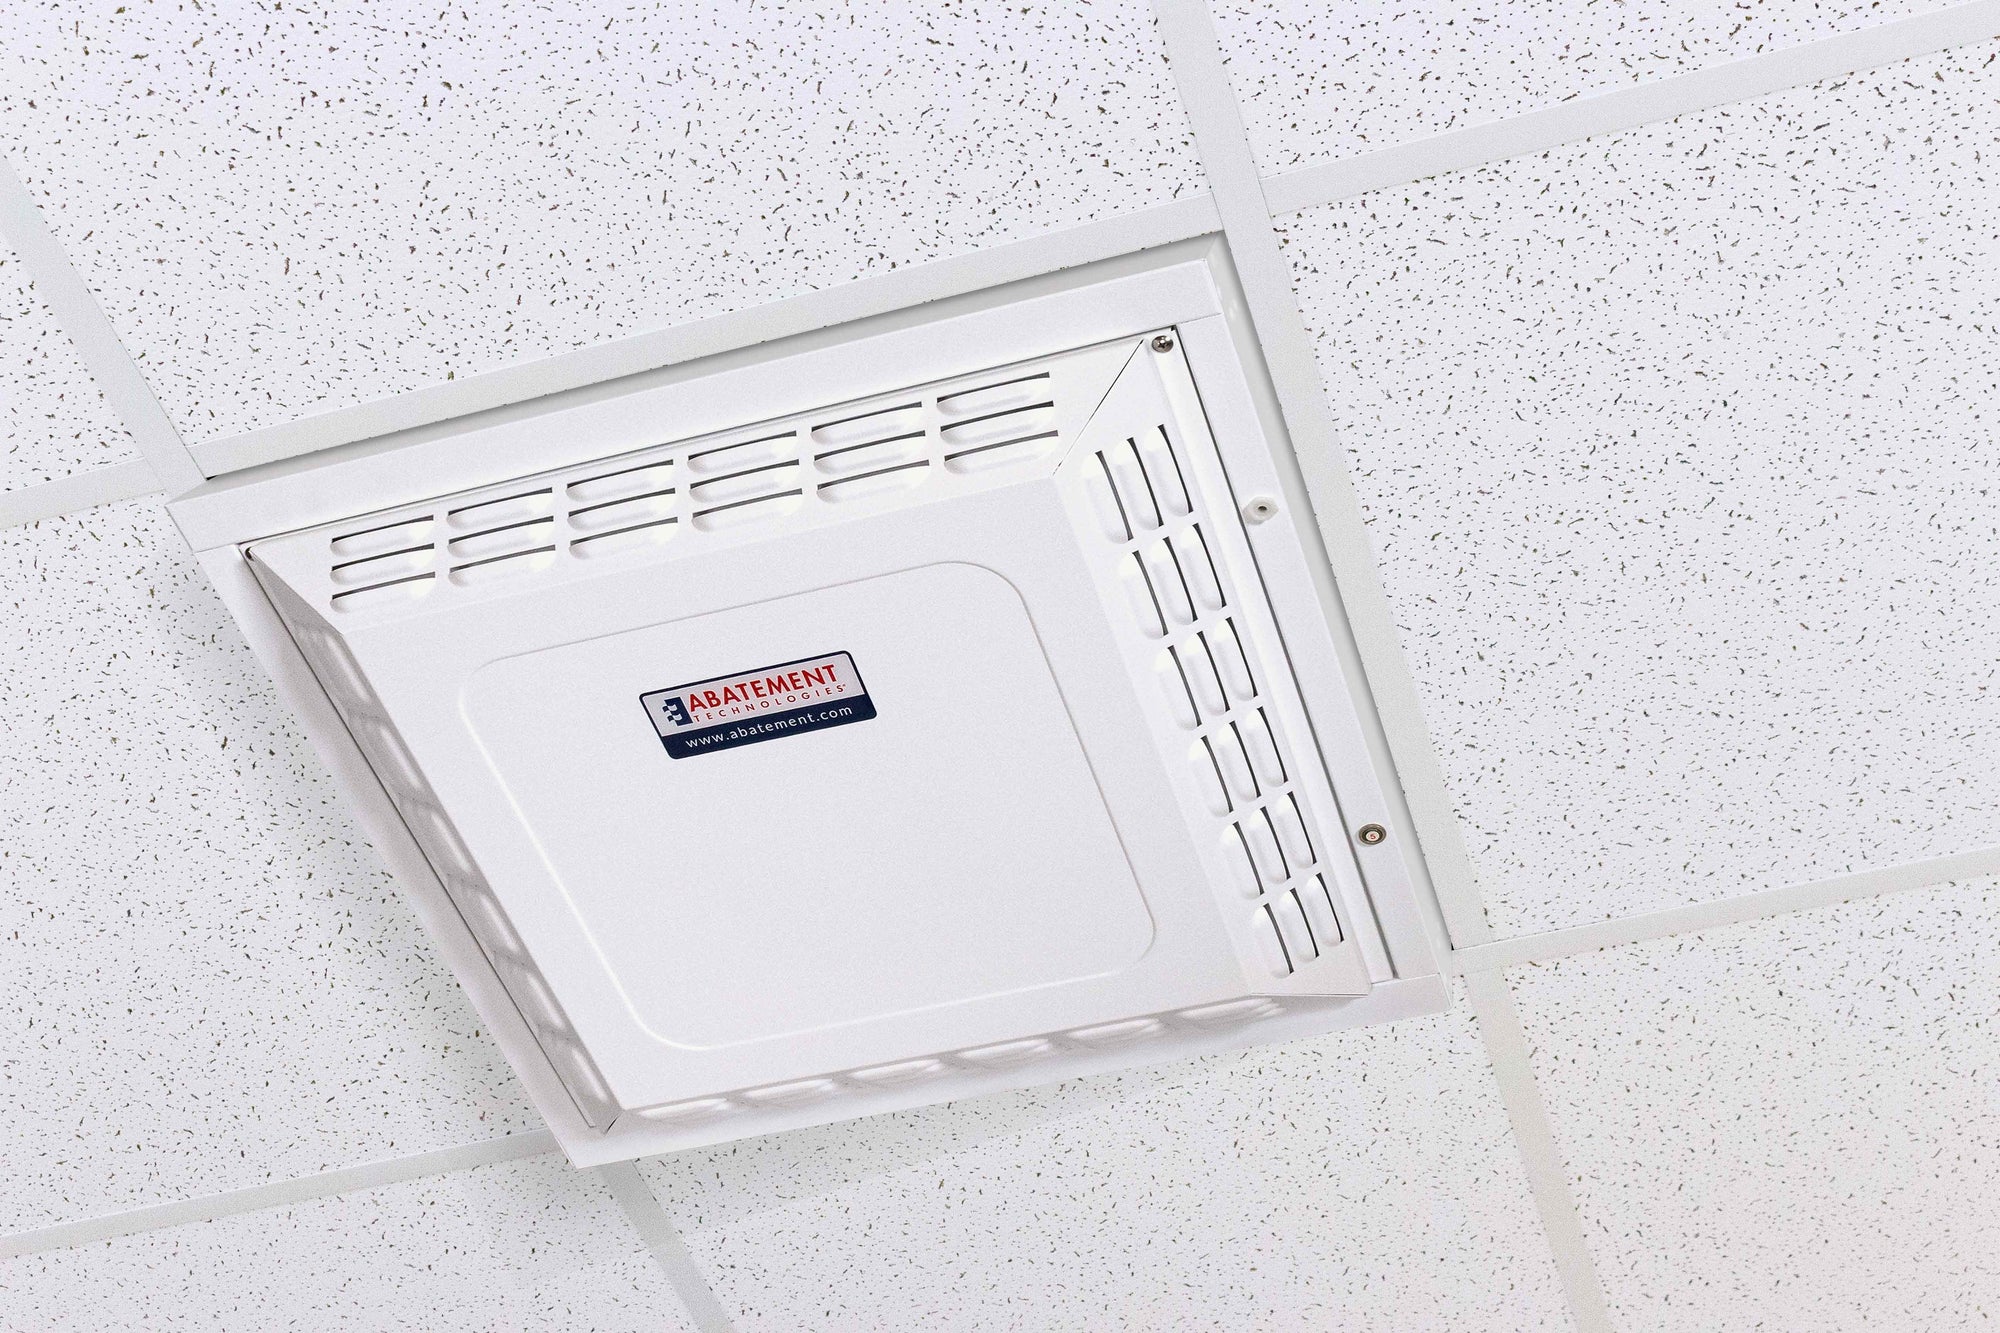 Abatement Technologies HEPA-CARE HC500CD Ceiling-Mounted Air Purification System